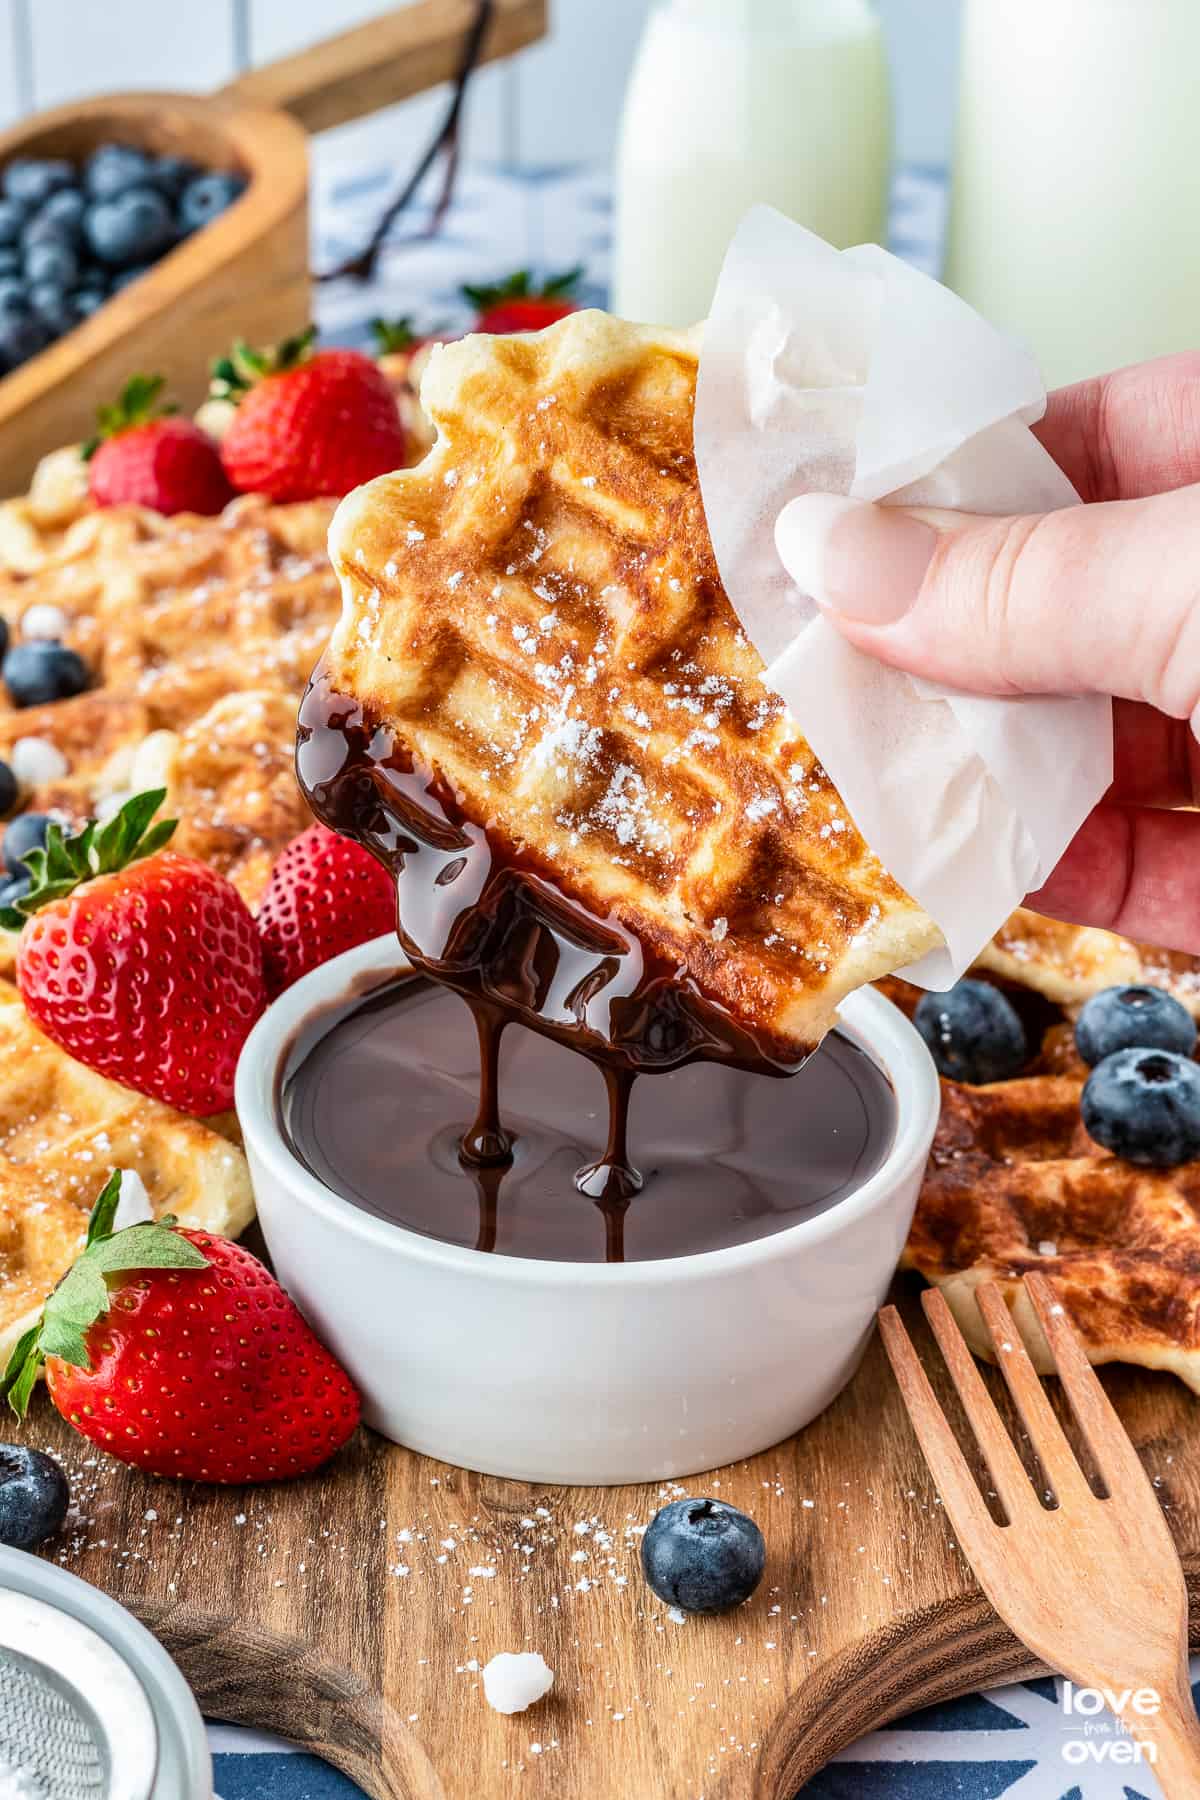 Hand holding a liege waffle dipped in chocolate with berries.